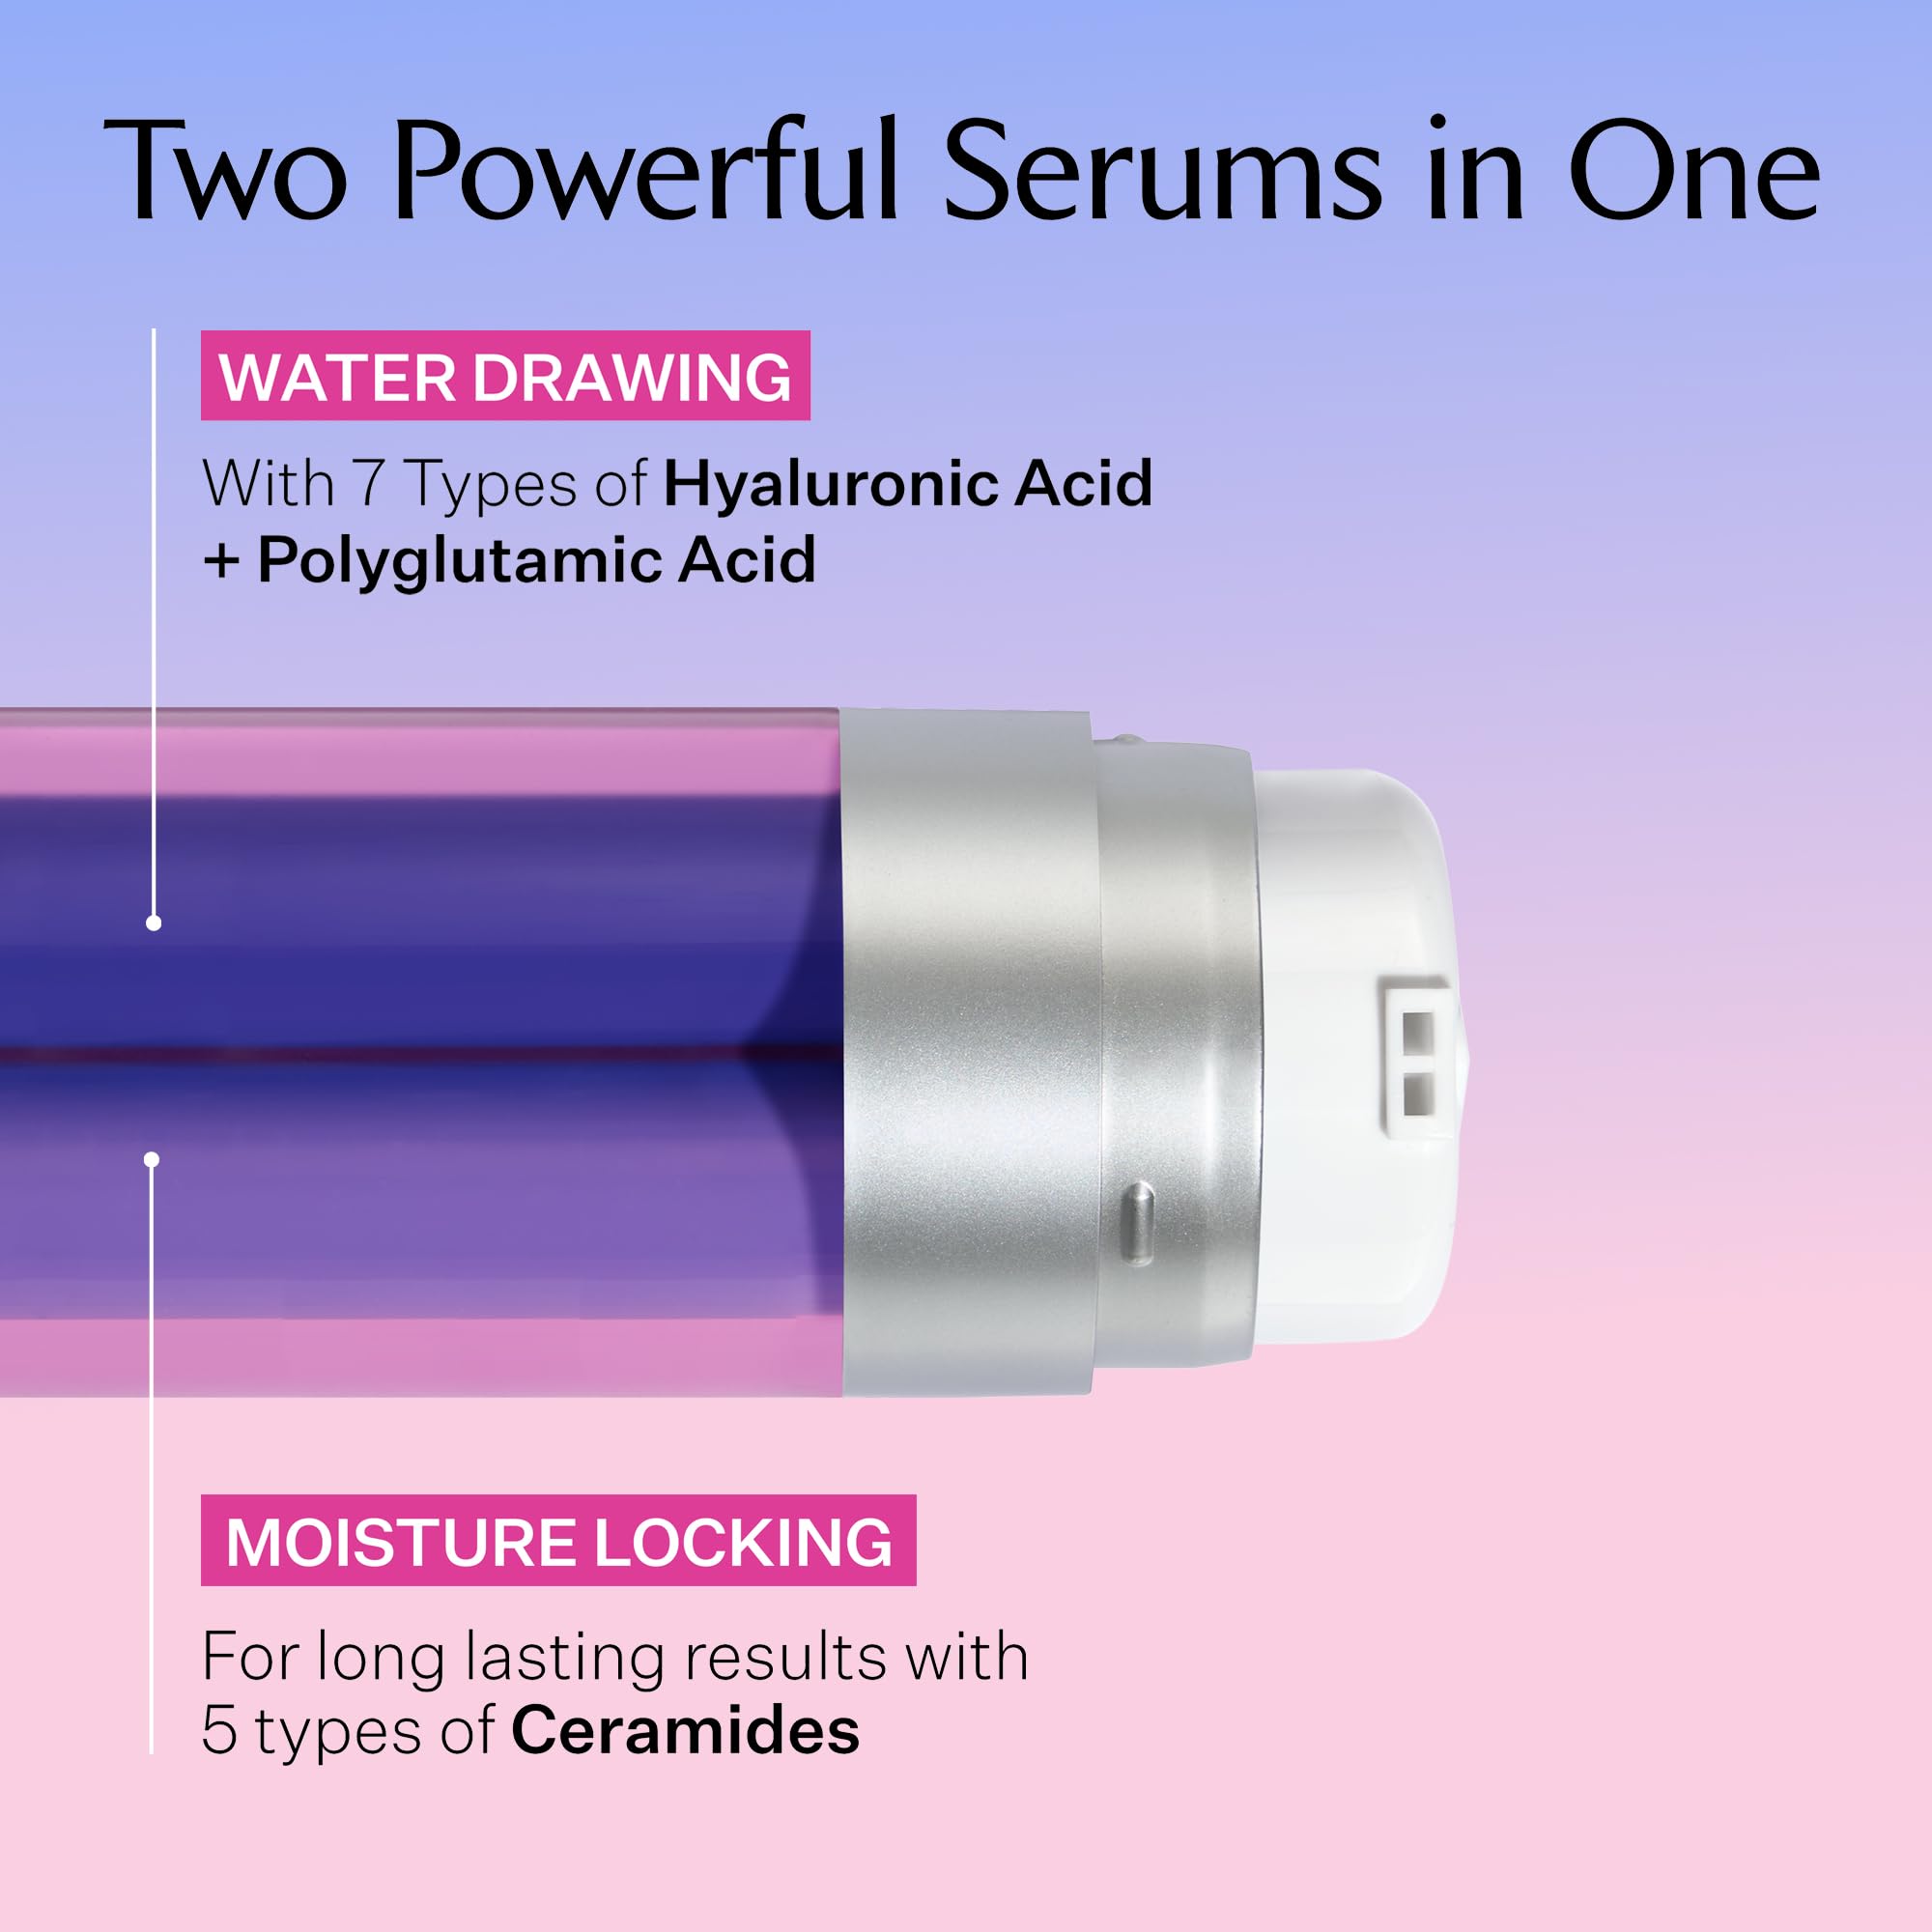 StriVectin Multi Action Hydration Multiplier Serum with Hyaluronic Acid, Ceramides and Peptides for Dehydrated, Dry Skin